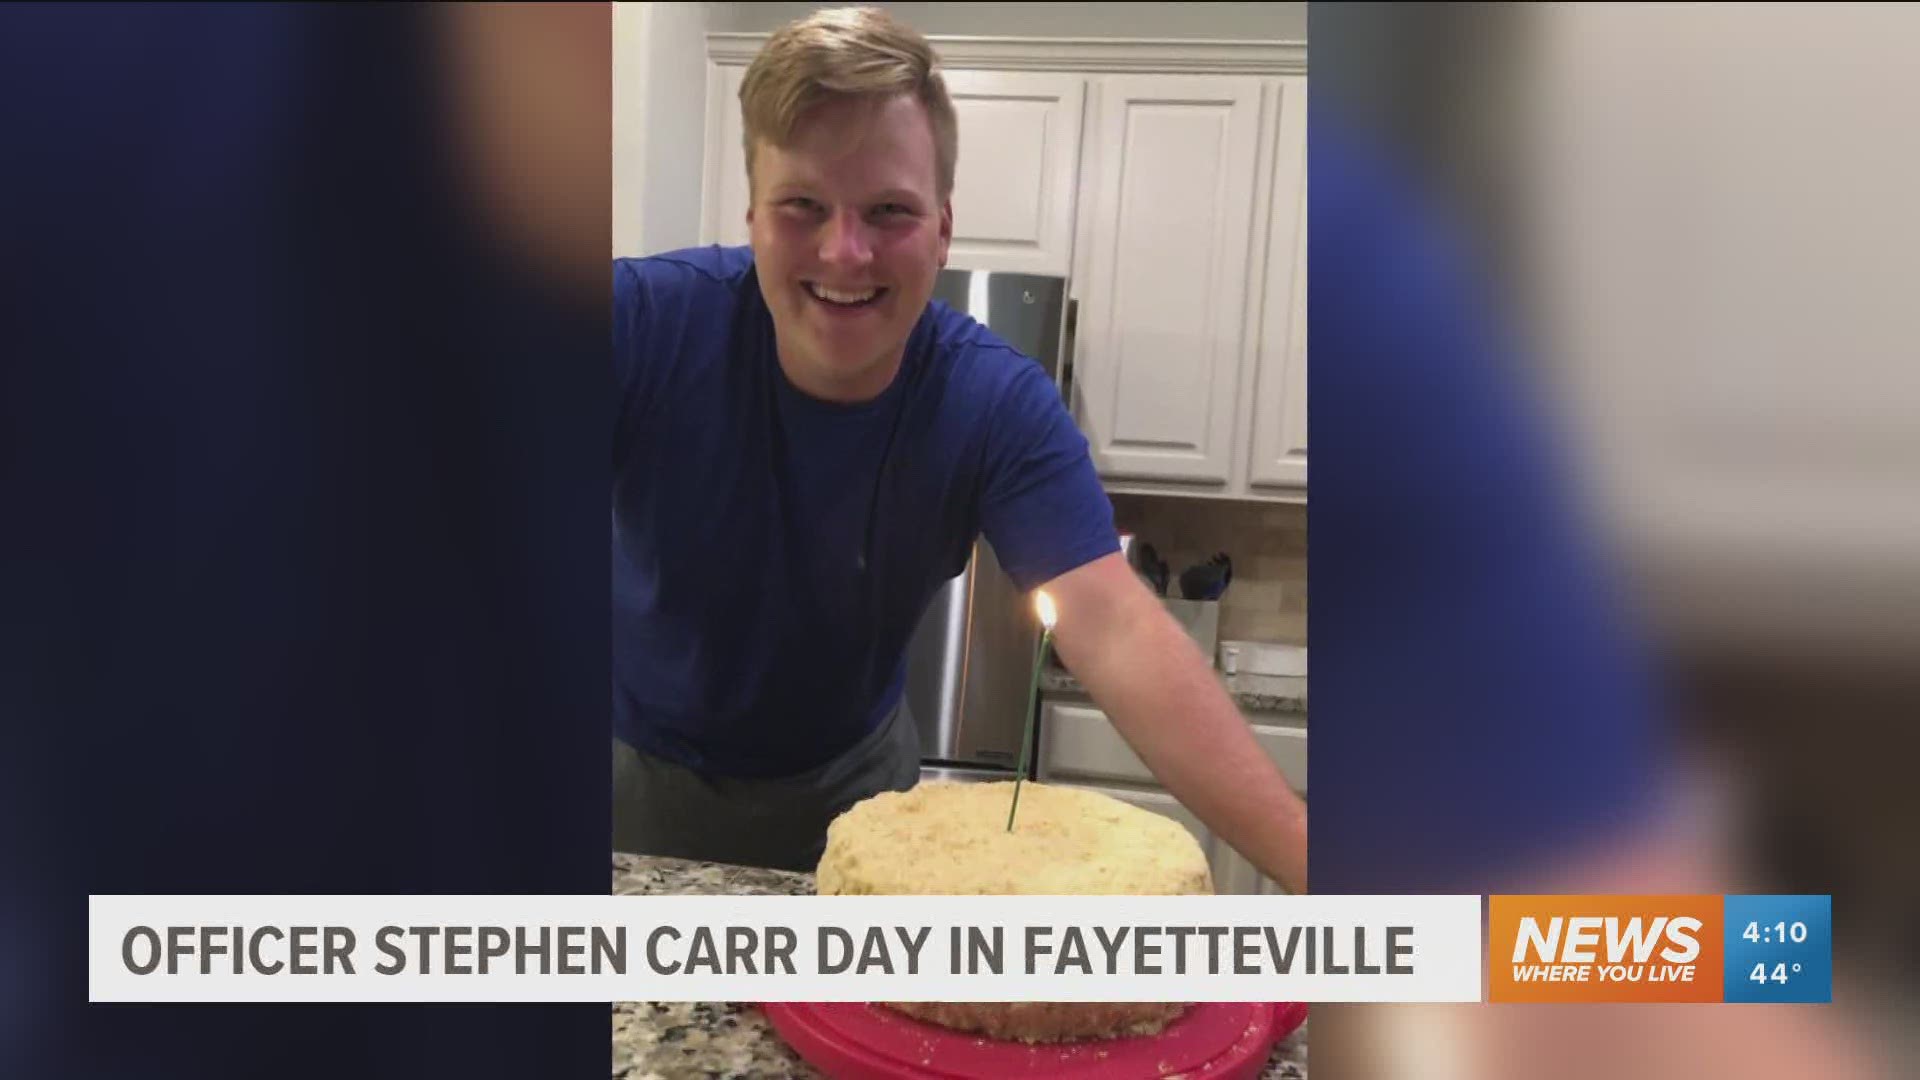 April 13th has been named Officer Stephen Carr day in Fayetteville following his tragic death in the line of duty.